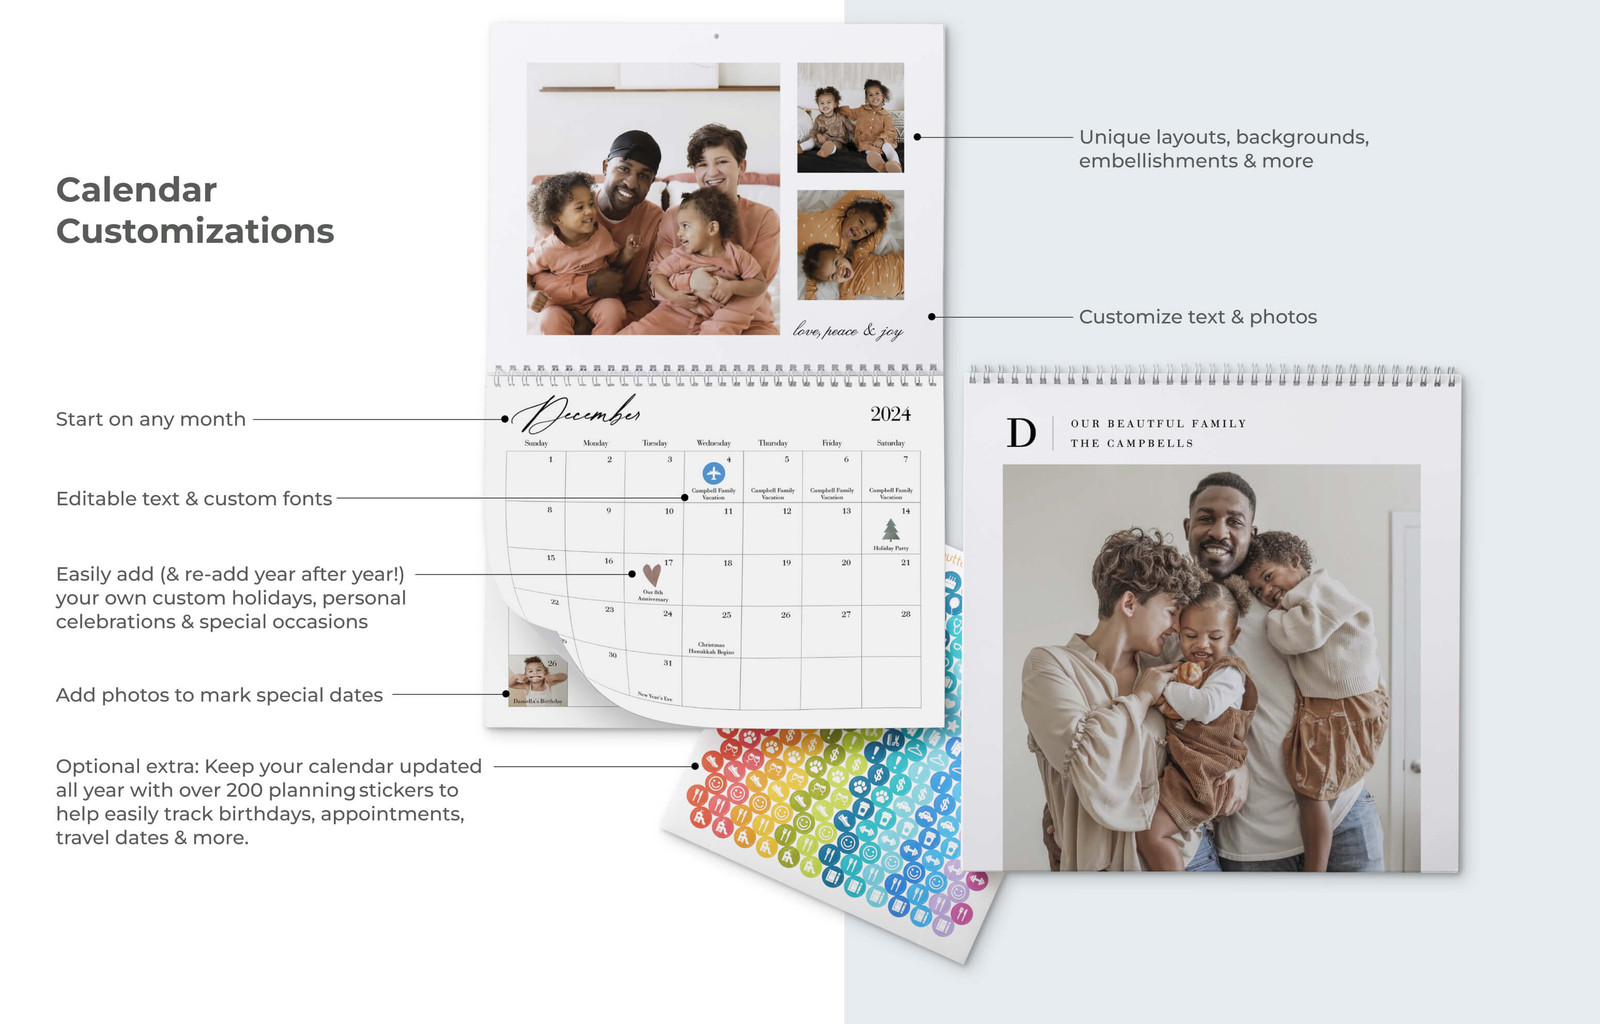 Upload Your Own Design Monthly Planner by Shutterfly